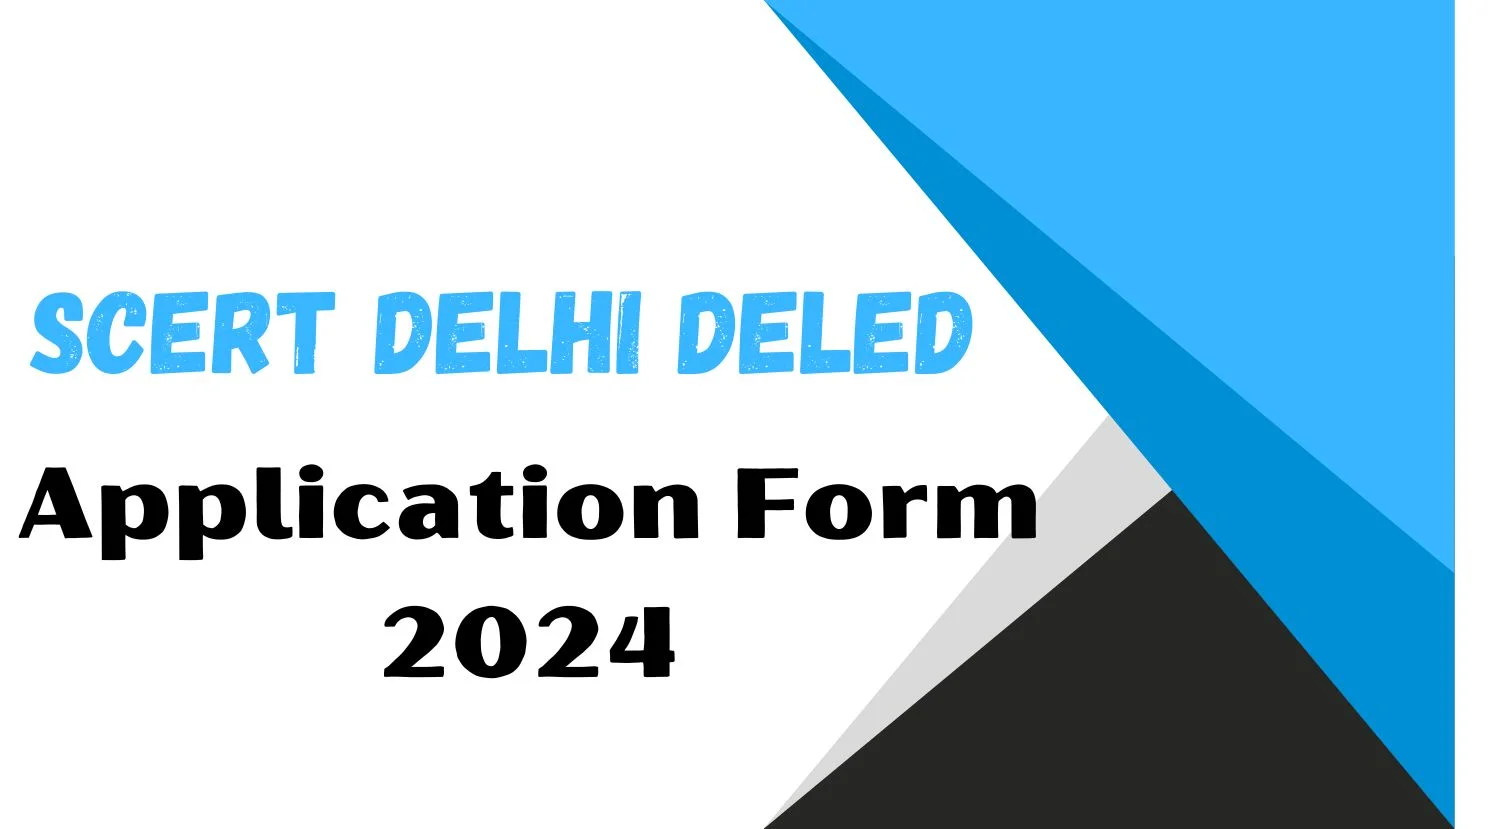 SCERT Delhi DELED Application Form 2024 - Application Fees Online Application Process and Eligibility Criteria